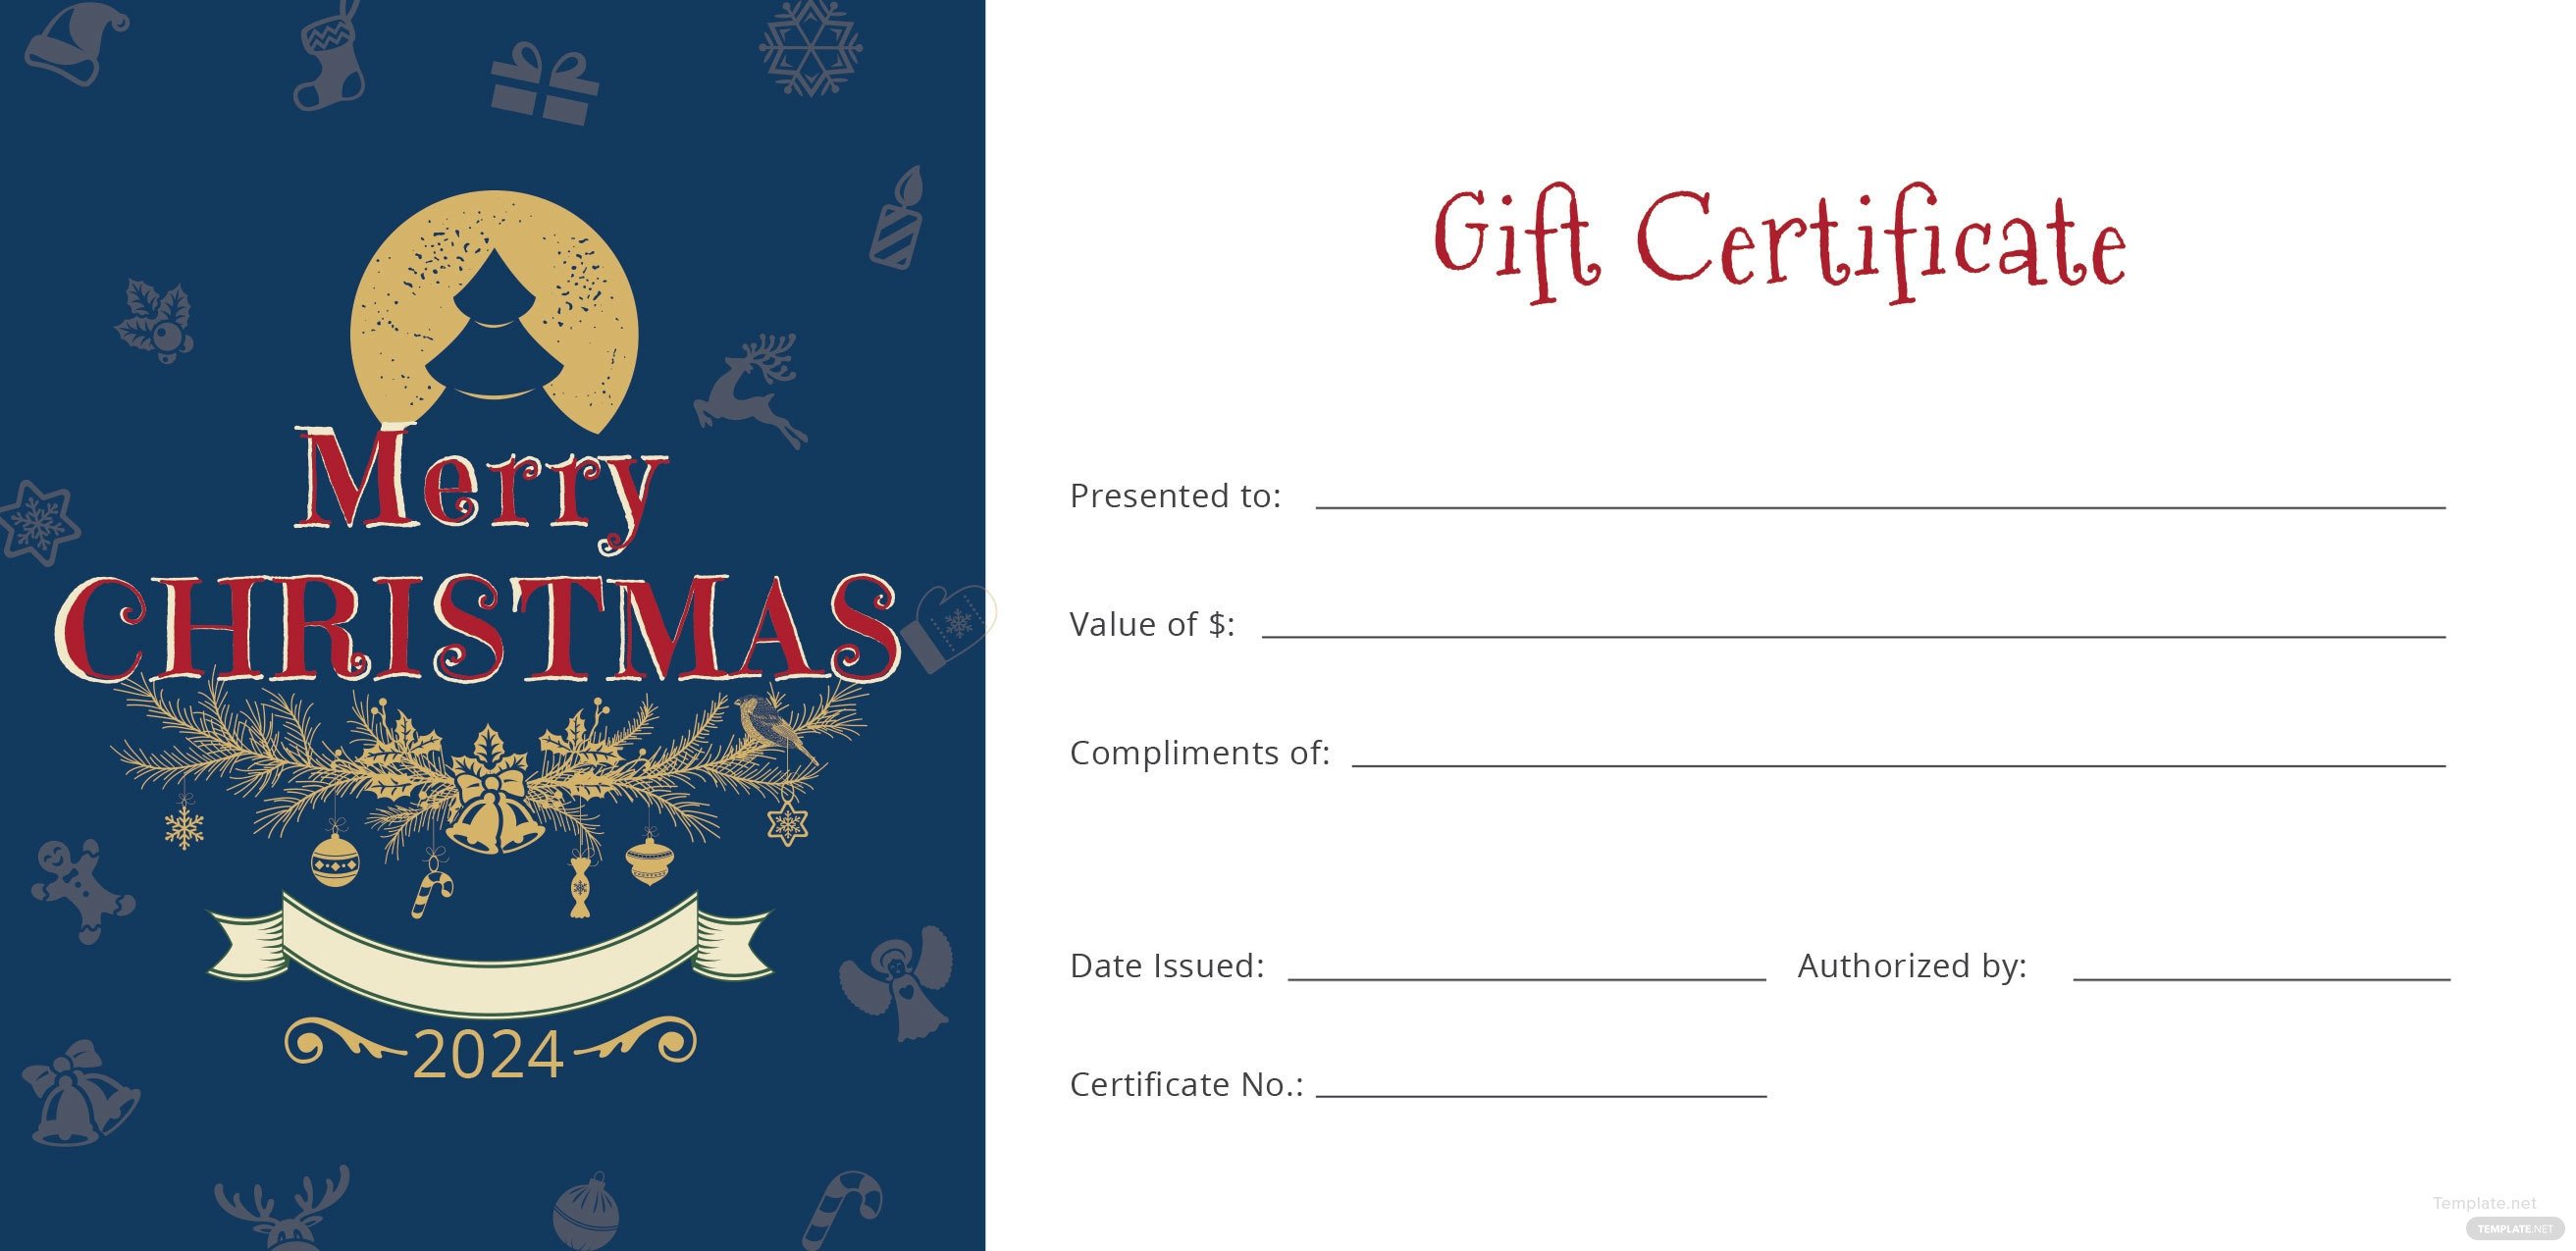 Free Christmas Gift Certificate Template in Adobe